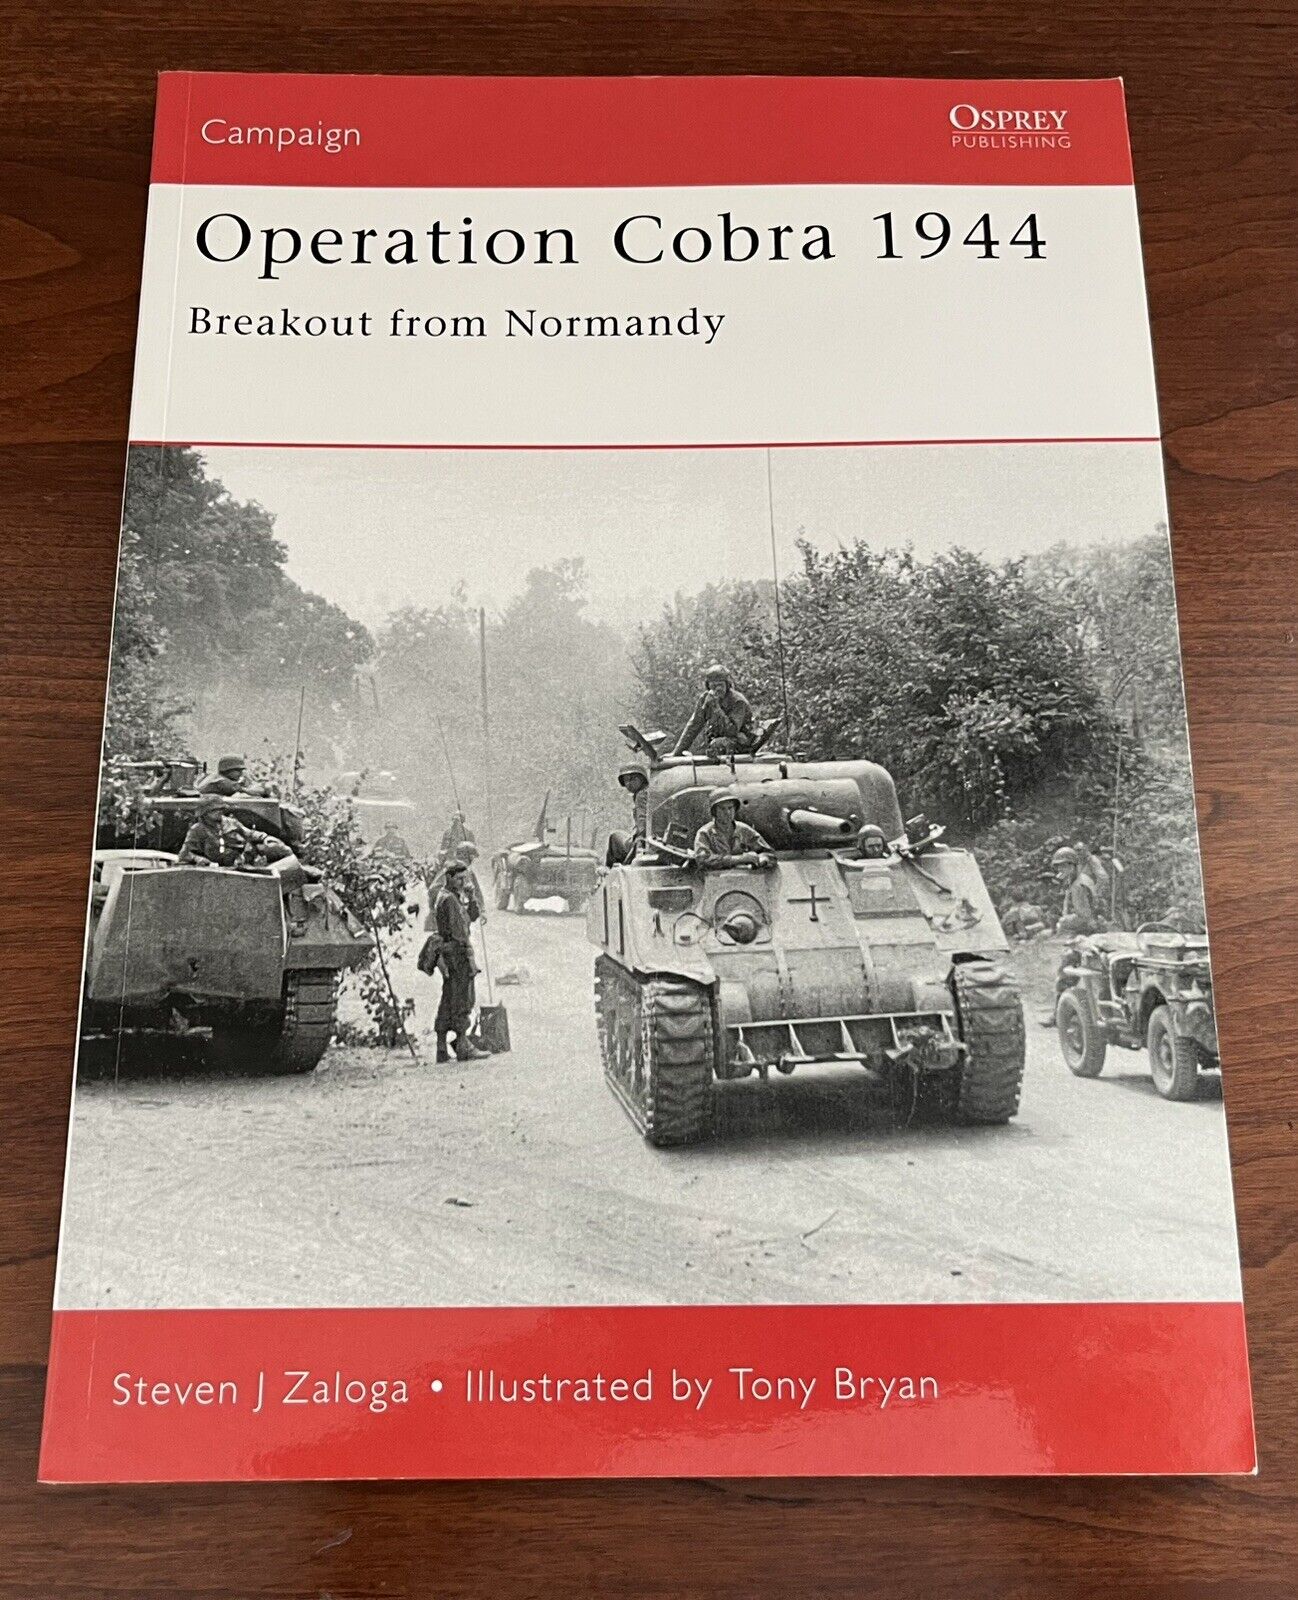 Campaign Operation Cobra 1944 Breakout From Normandy Osprey Publishing UNUSED